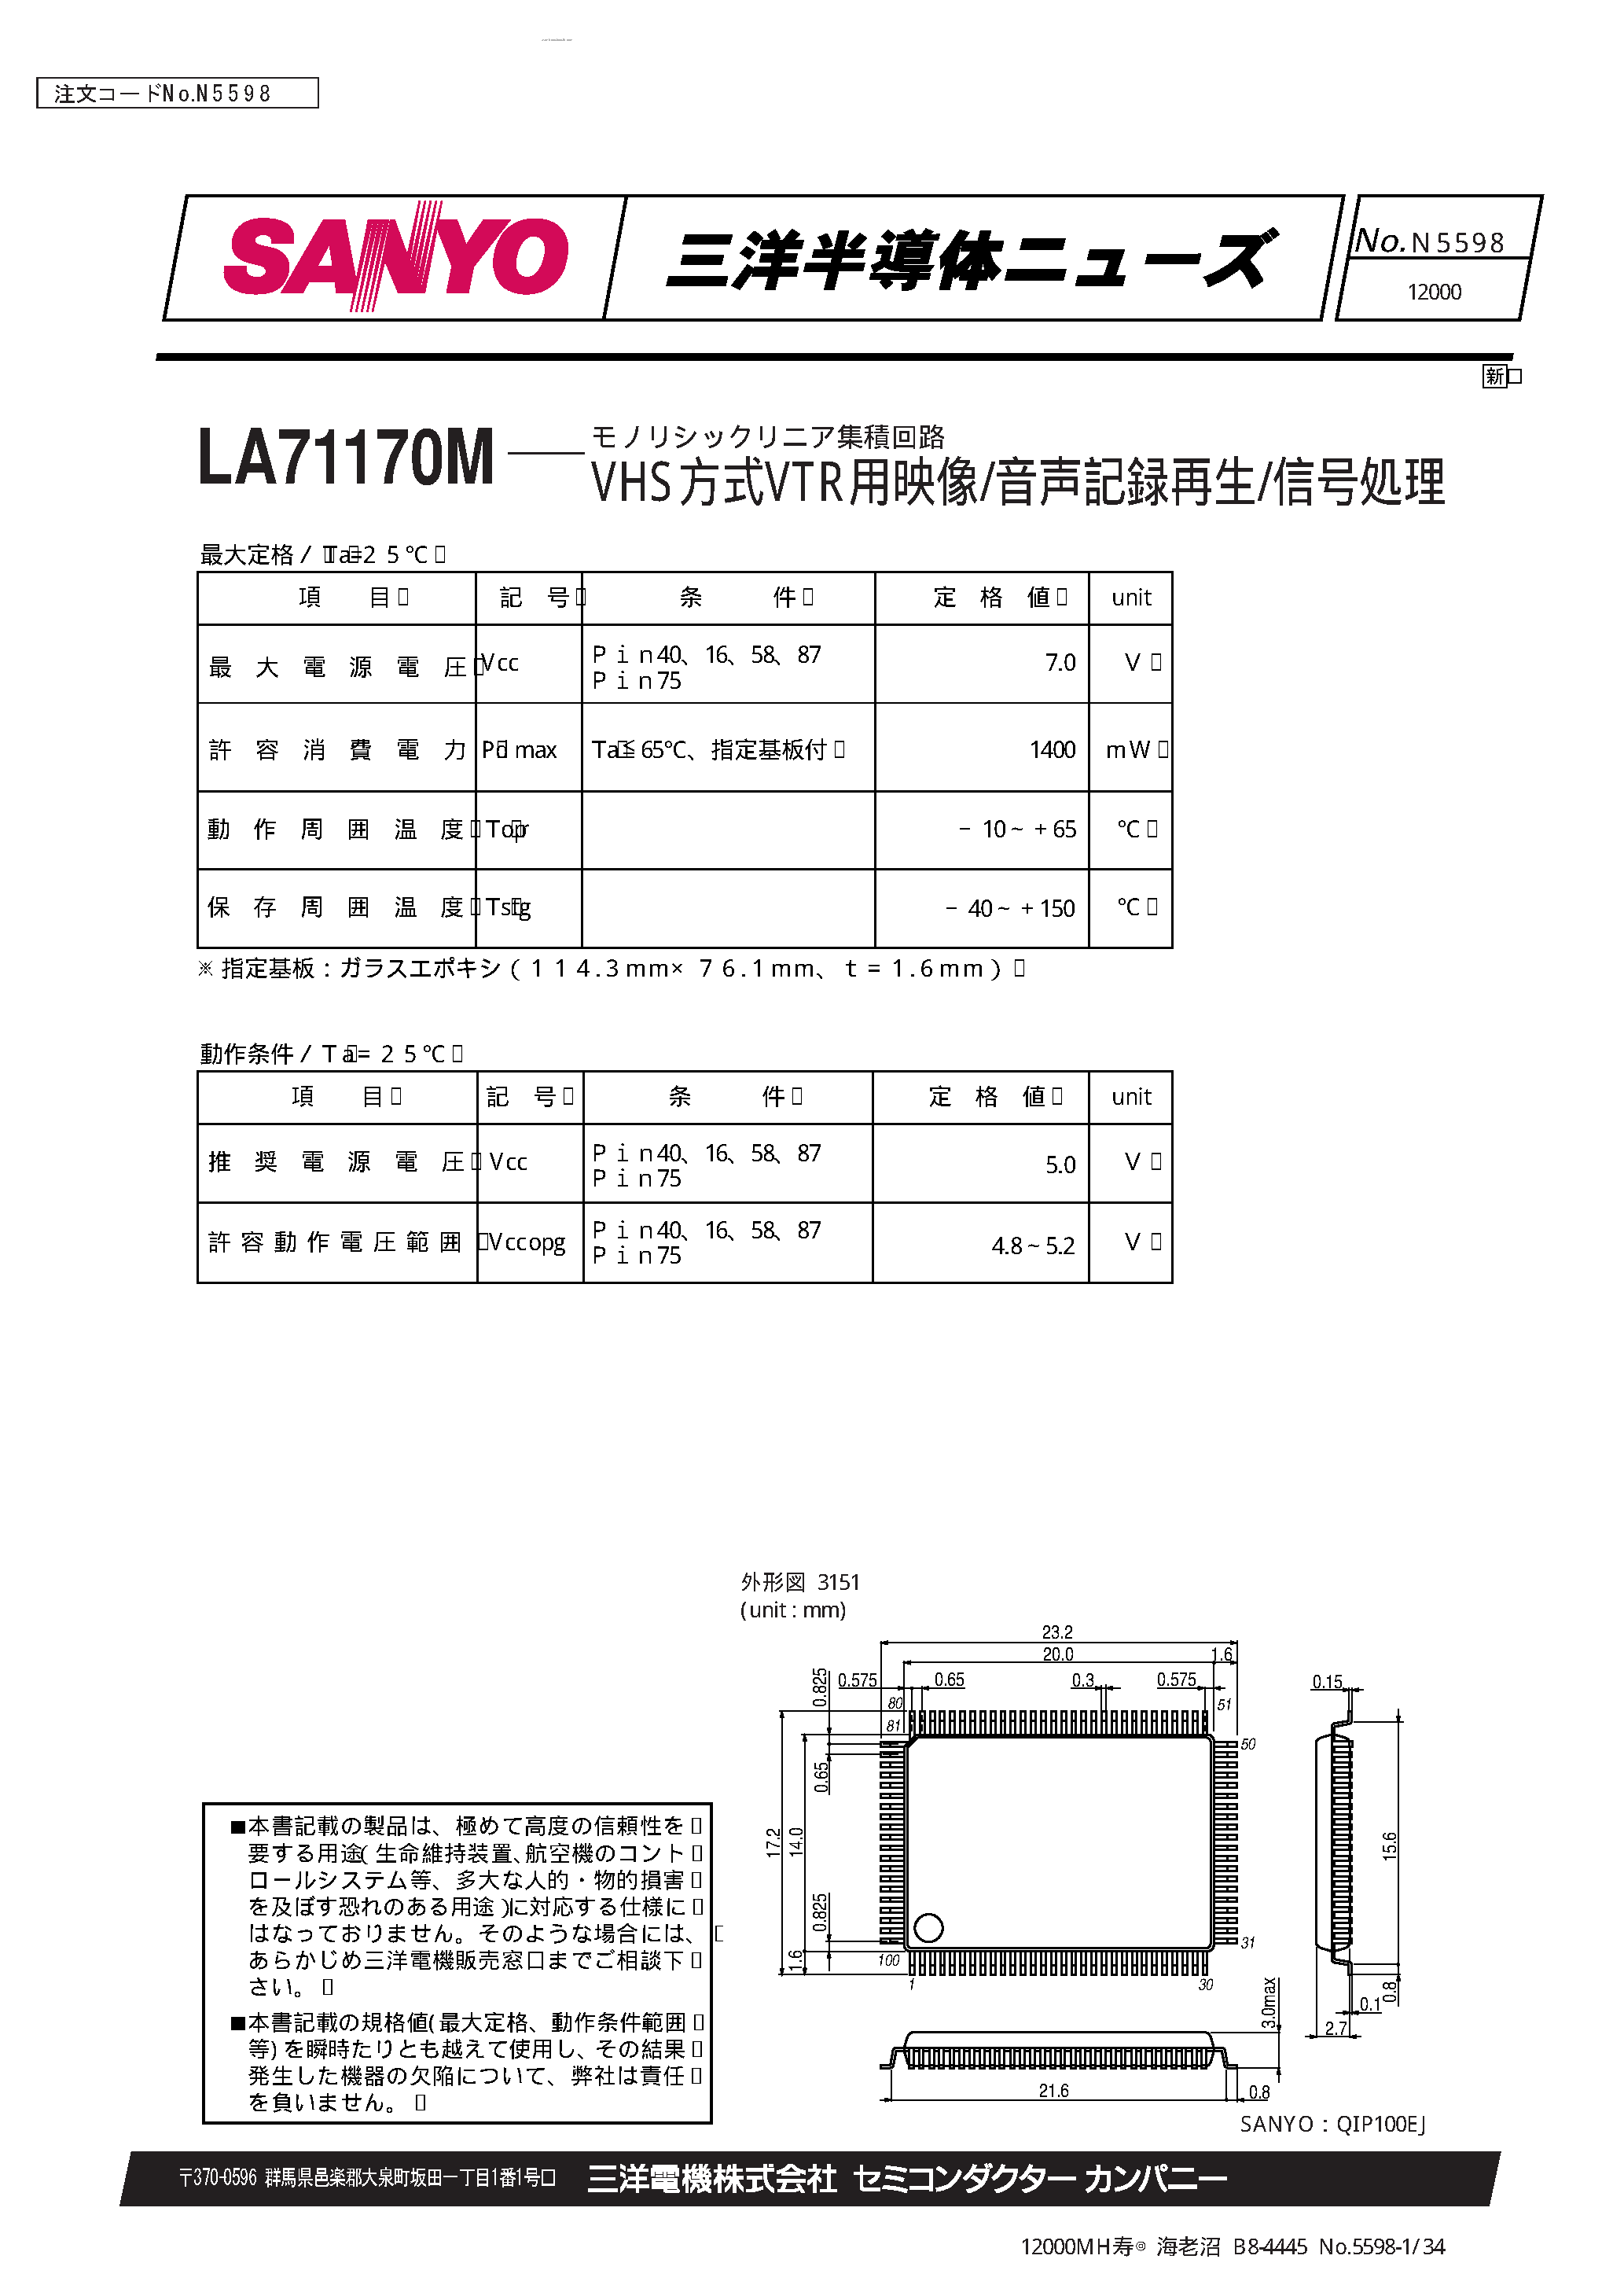 Datasheet LA71170M - VHS video Y/C/A in a single chip page 1